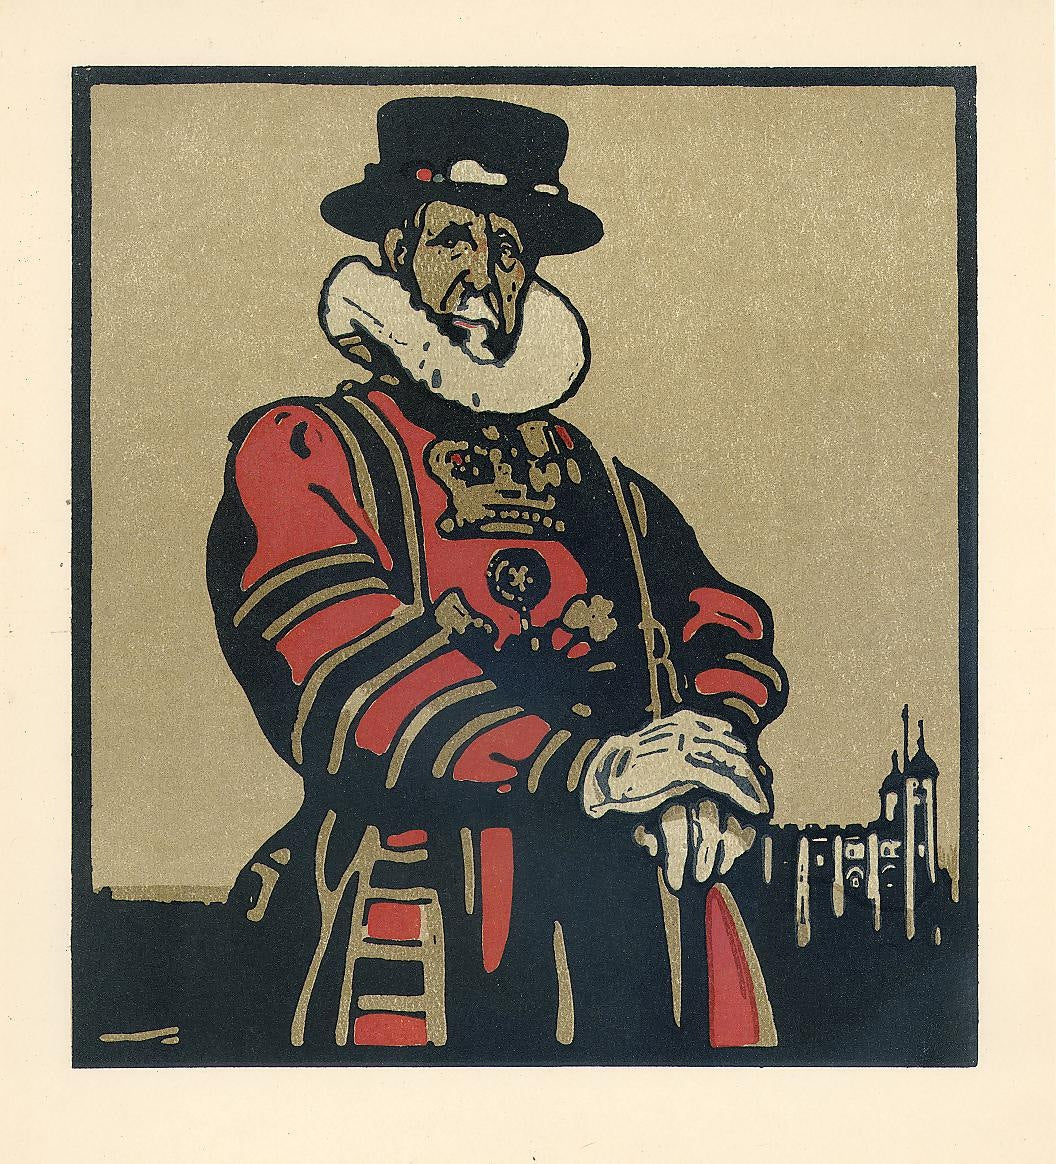 Nicholson, William. [Beefeater/The Tower]